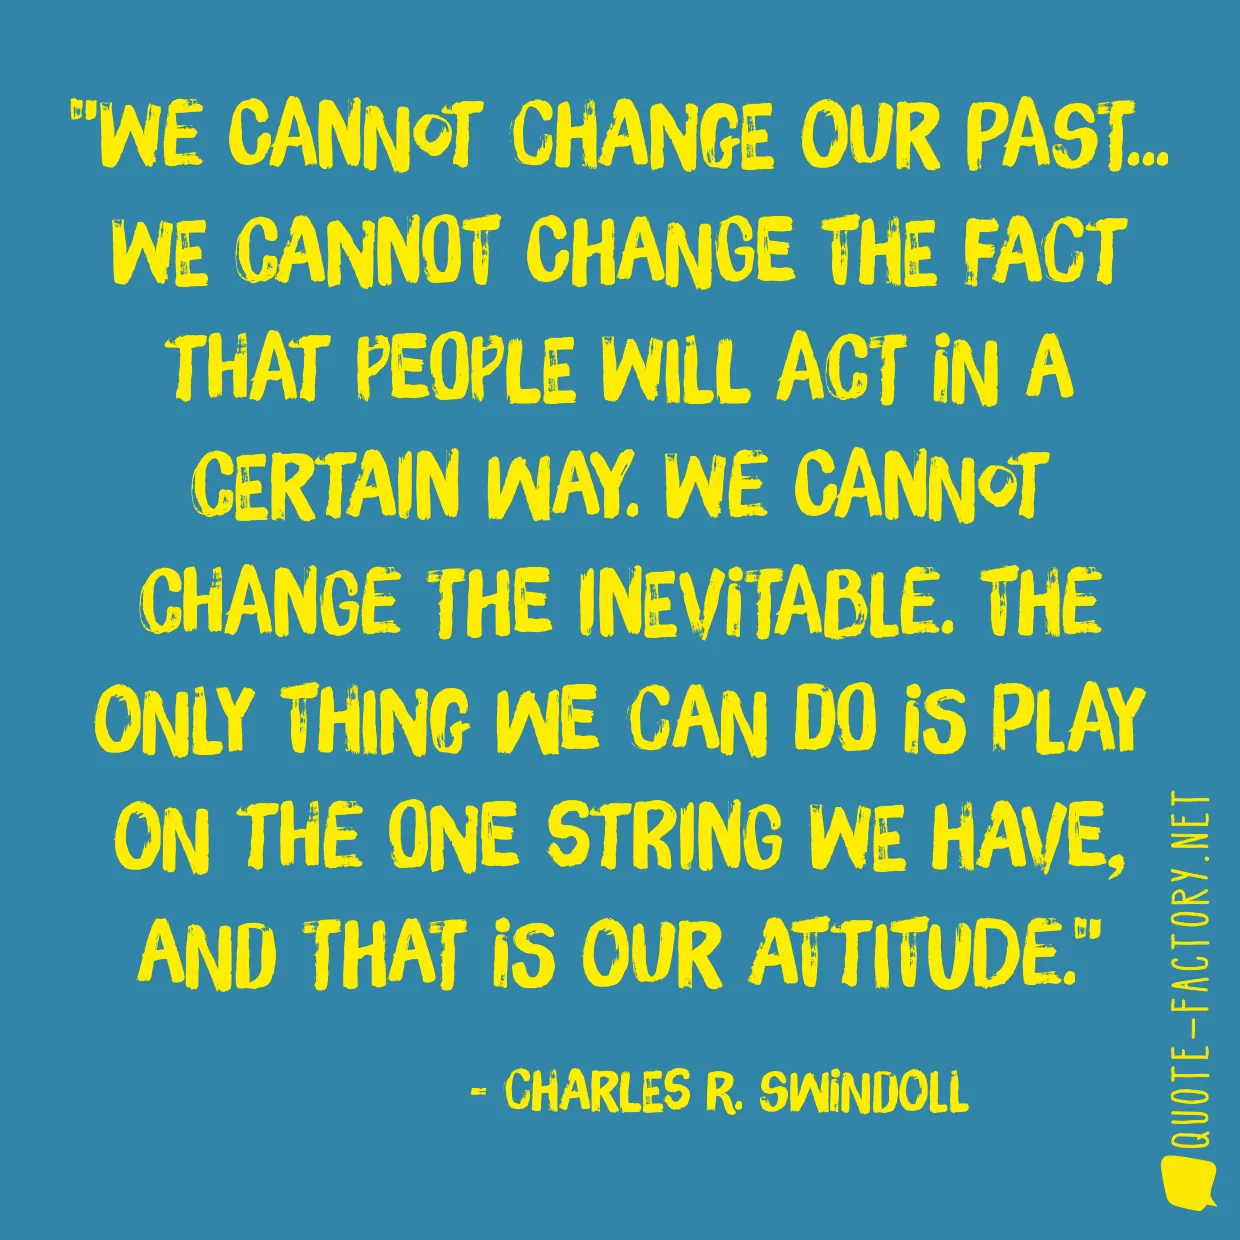 We cannot change our past... we cannot change the fact that people will act in a certain way. We cannot change the inevitable. The only thing we can do is play on the one string we have, and that is our attitude.